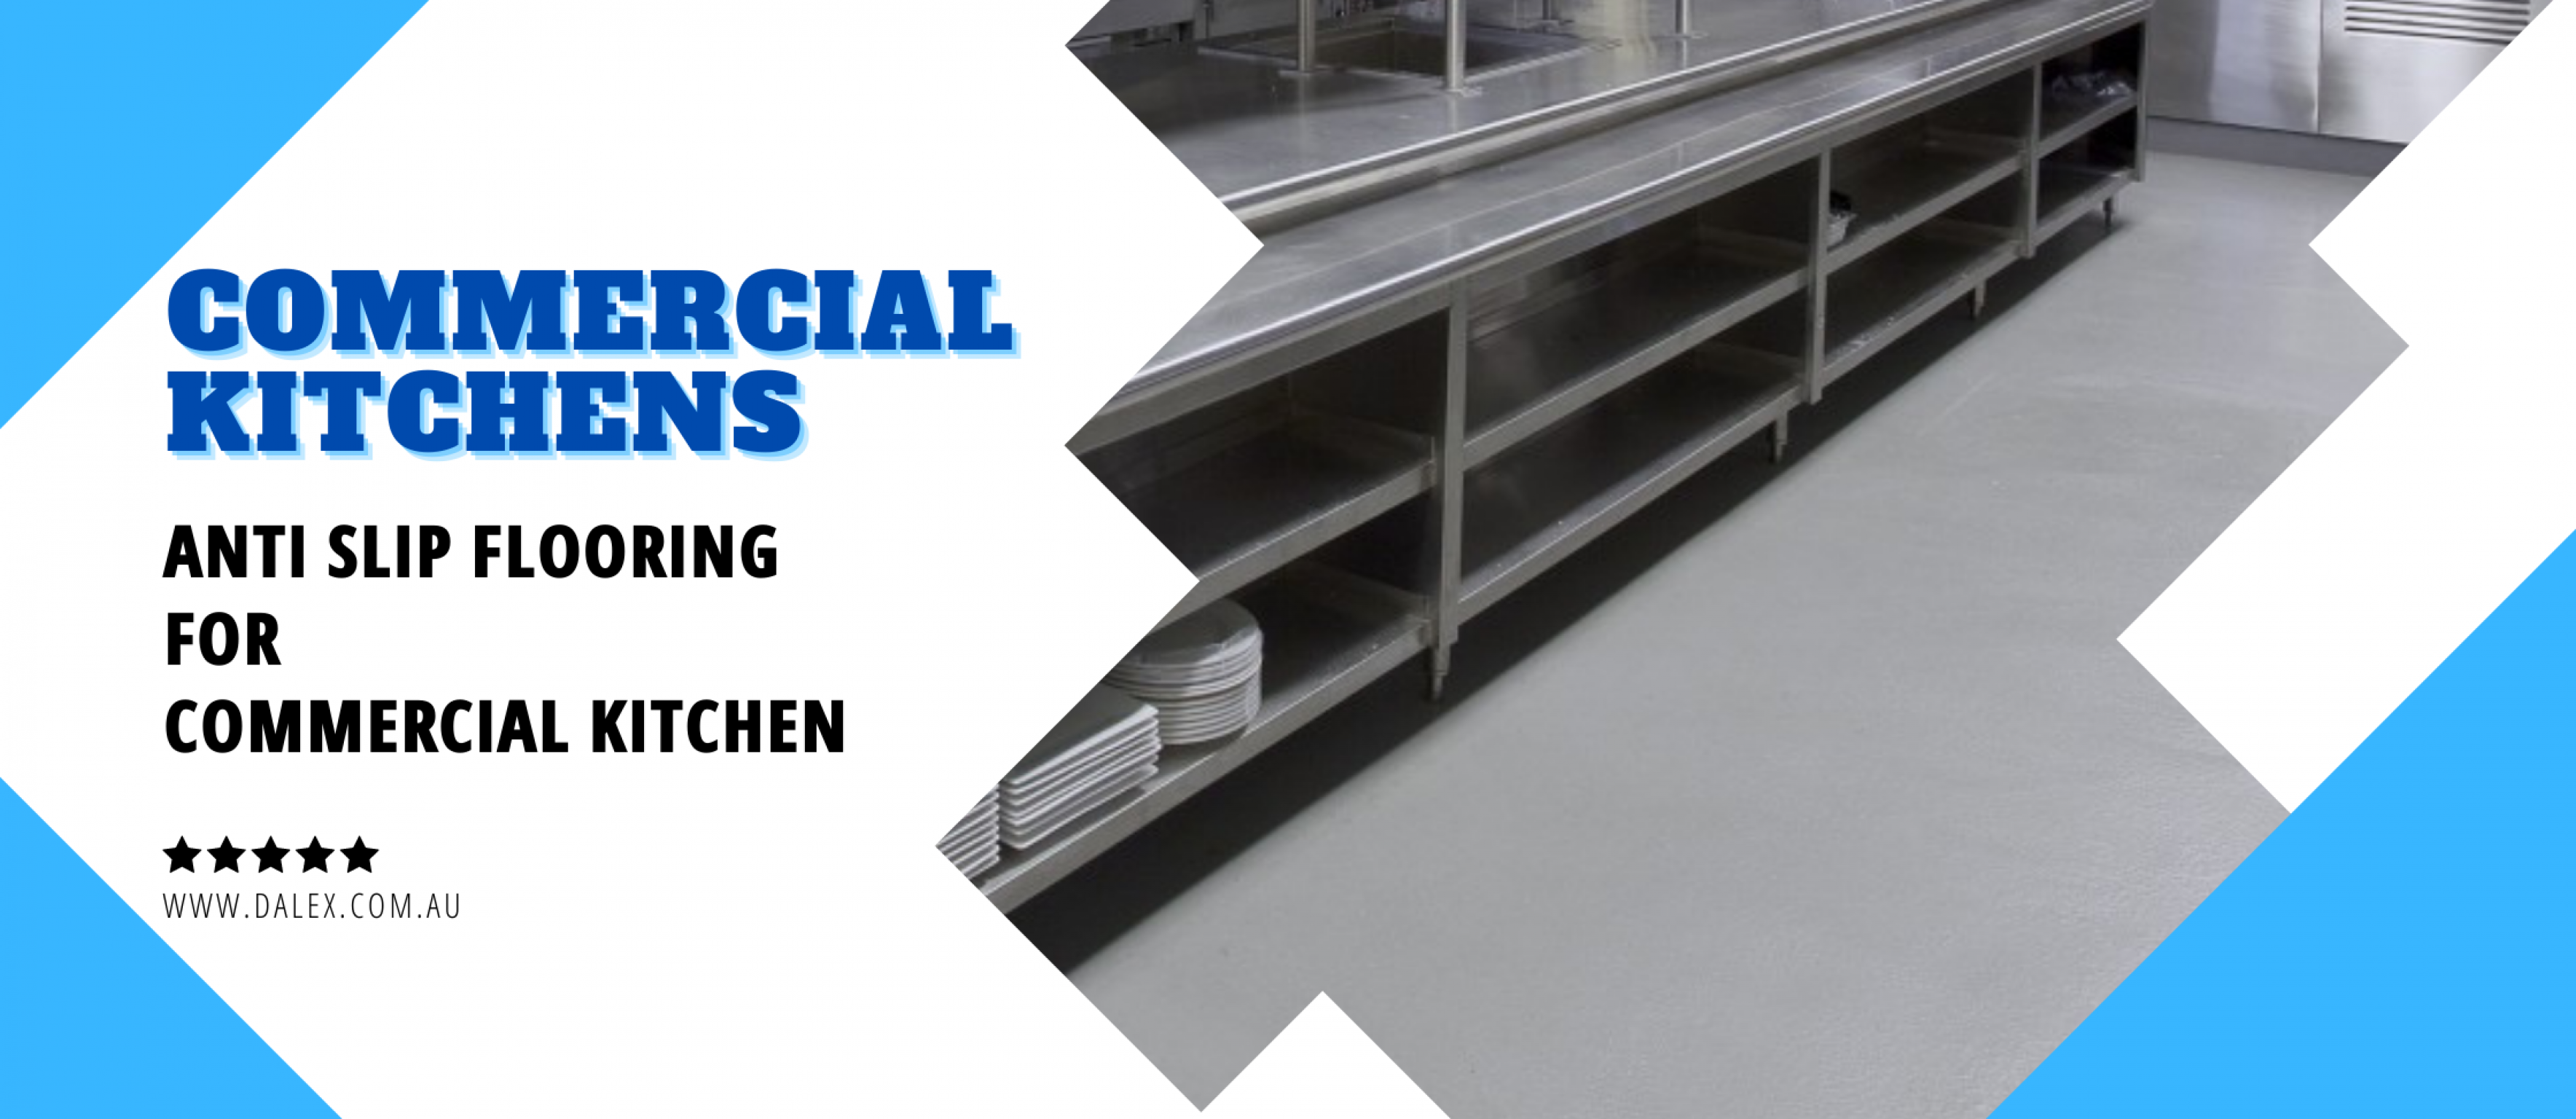 COMMERCIAL KITCHENS ANTI SLIP FLOORING FOR COMMERCIAL KITCHEN